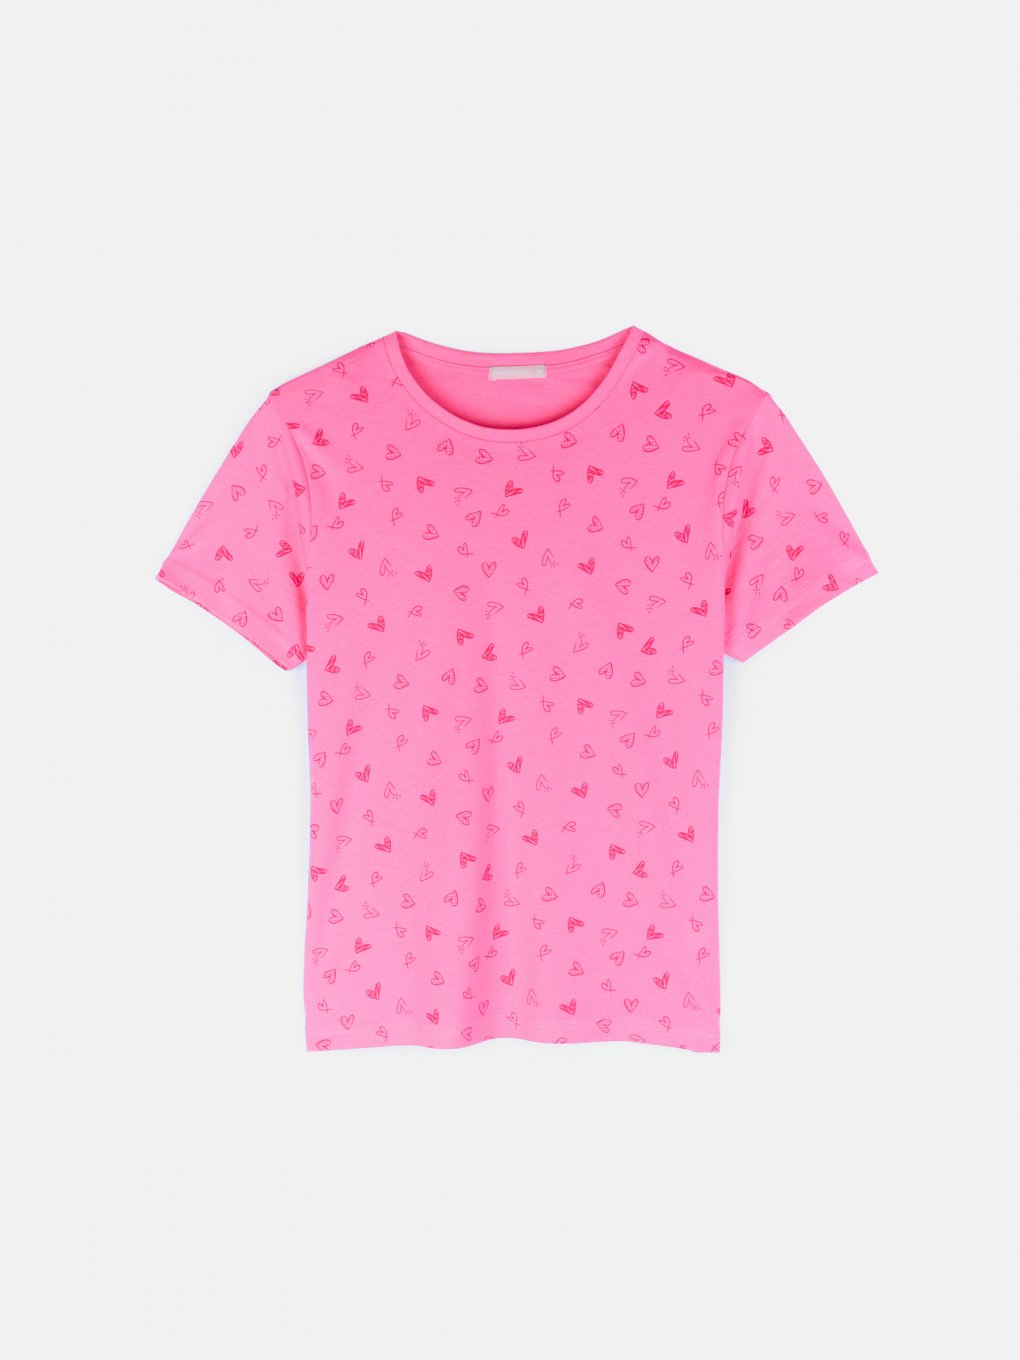 All over print t-shirt